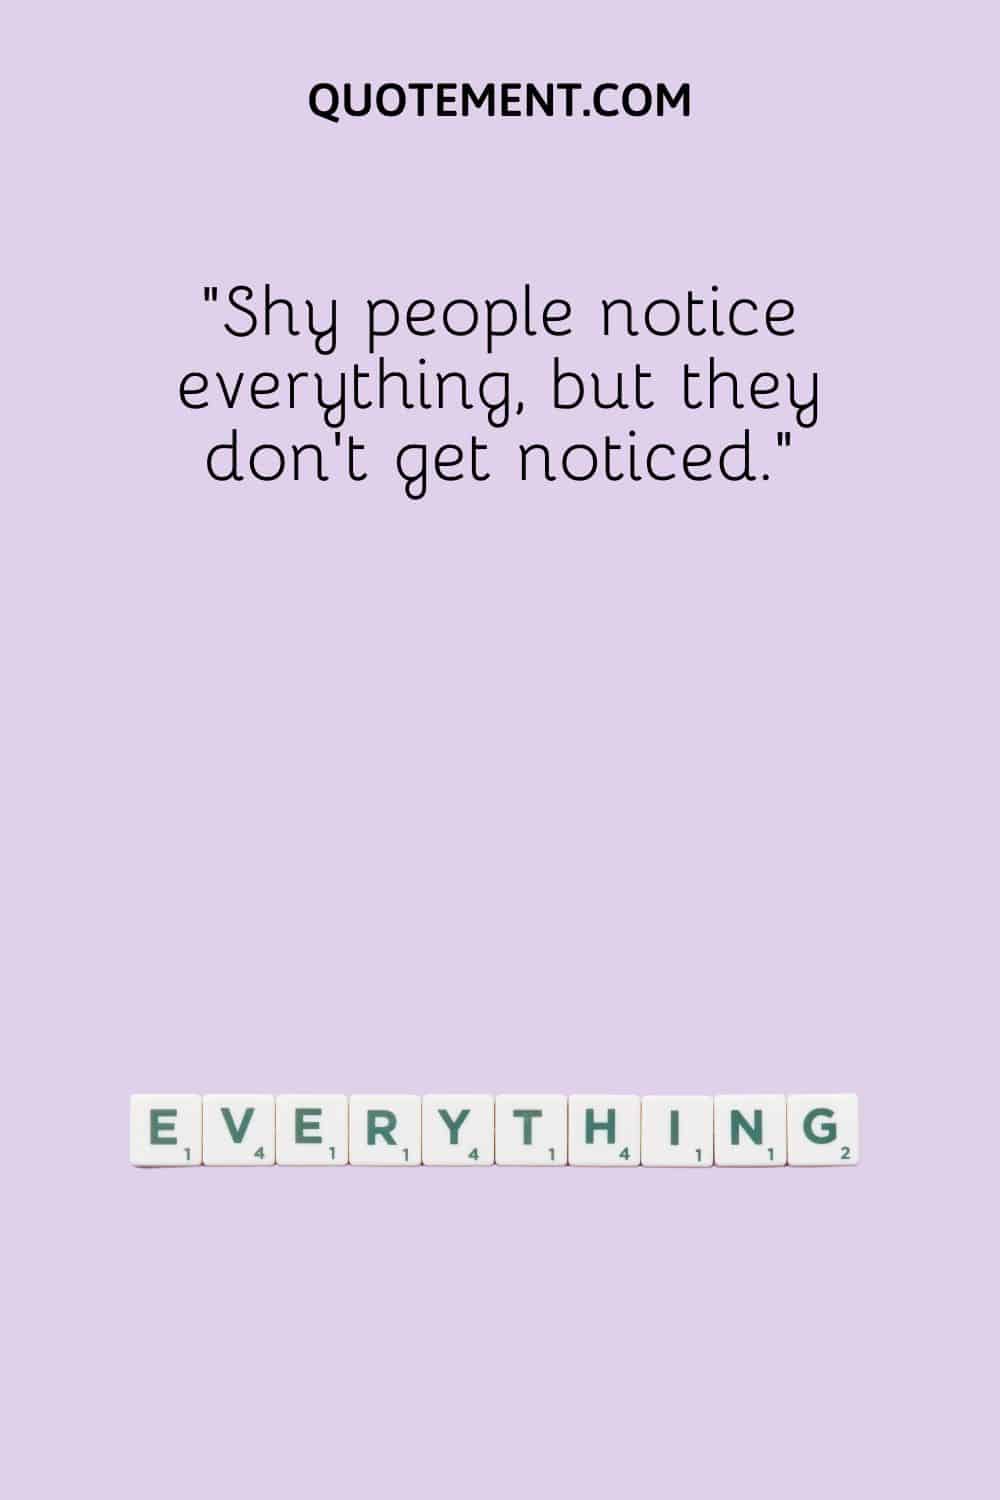 Shy people notice everything, but they don’t get noticed